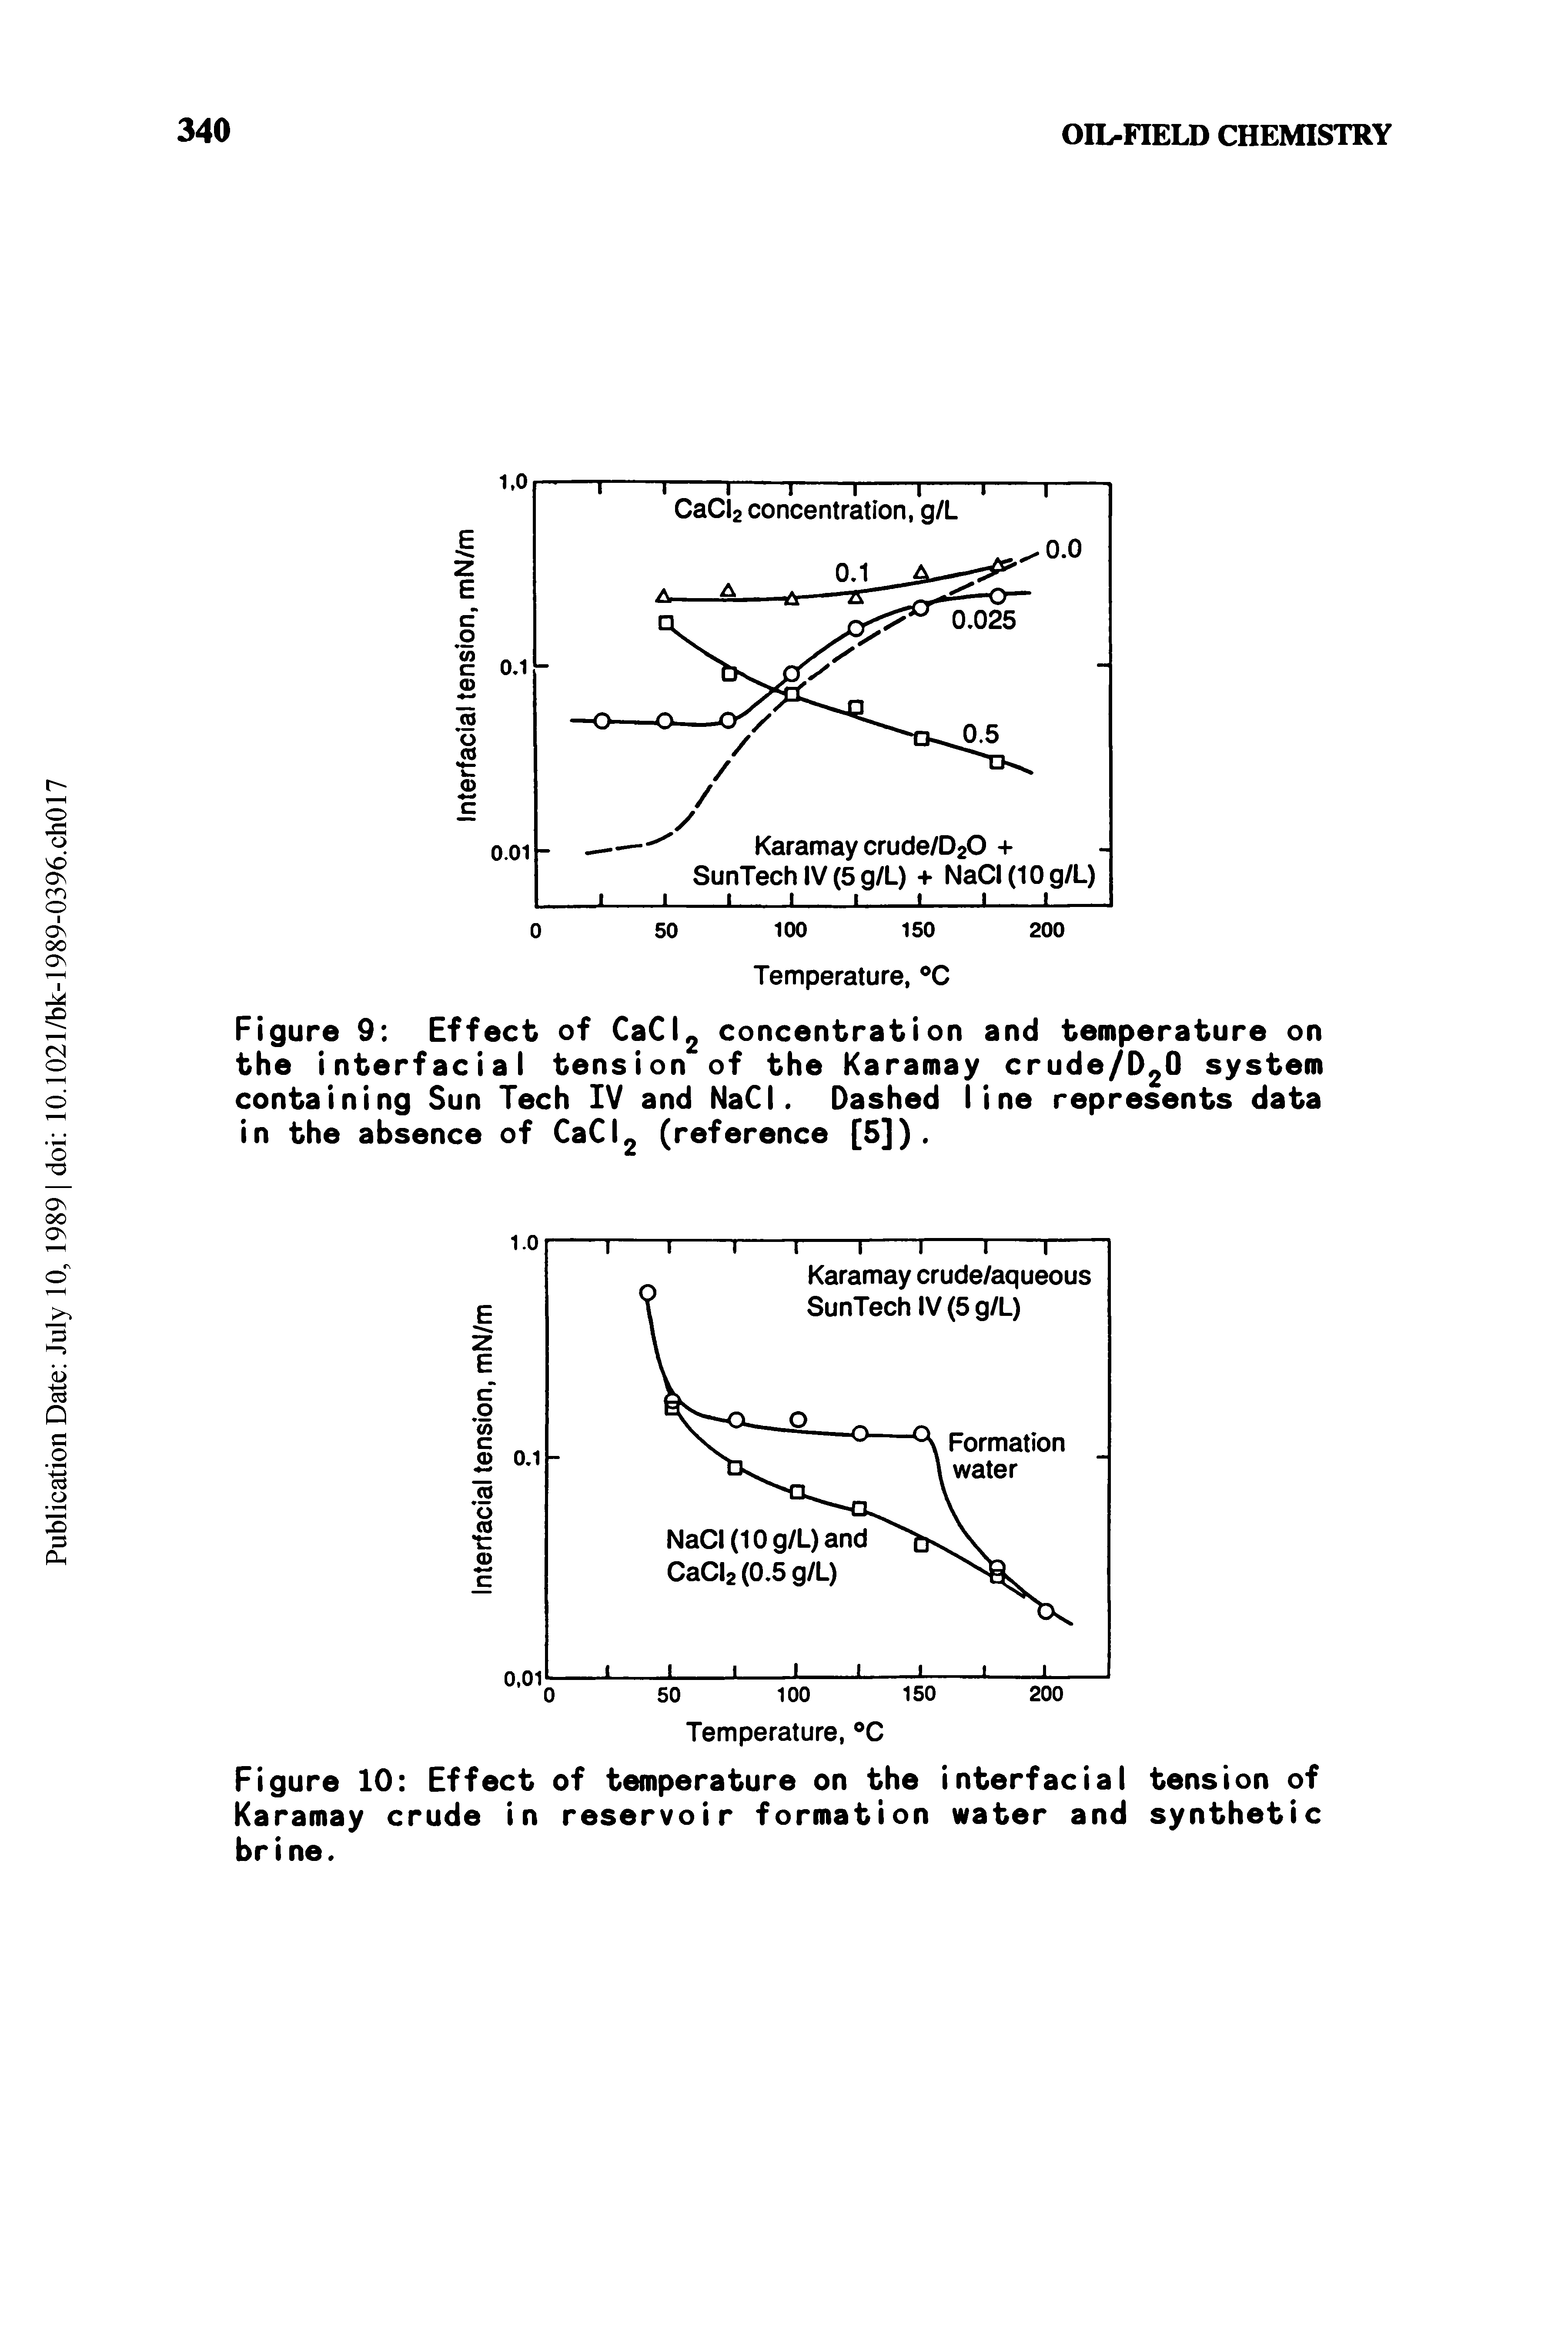 Figure 9 Effect of CaCI2 concentration and temperature on the interfacial tension of the Karamay crude/D20 system containing Sun Tech IV and NaCI. Dashed line represents data in the absence of CaCI2 (reference [5]).